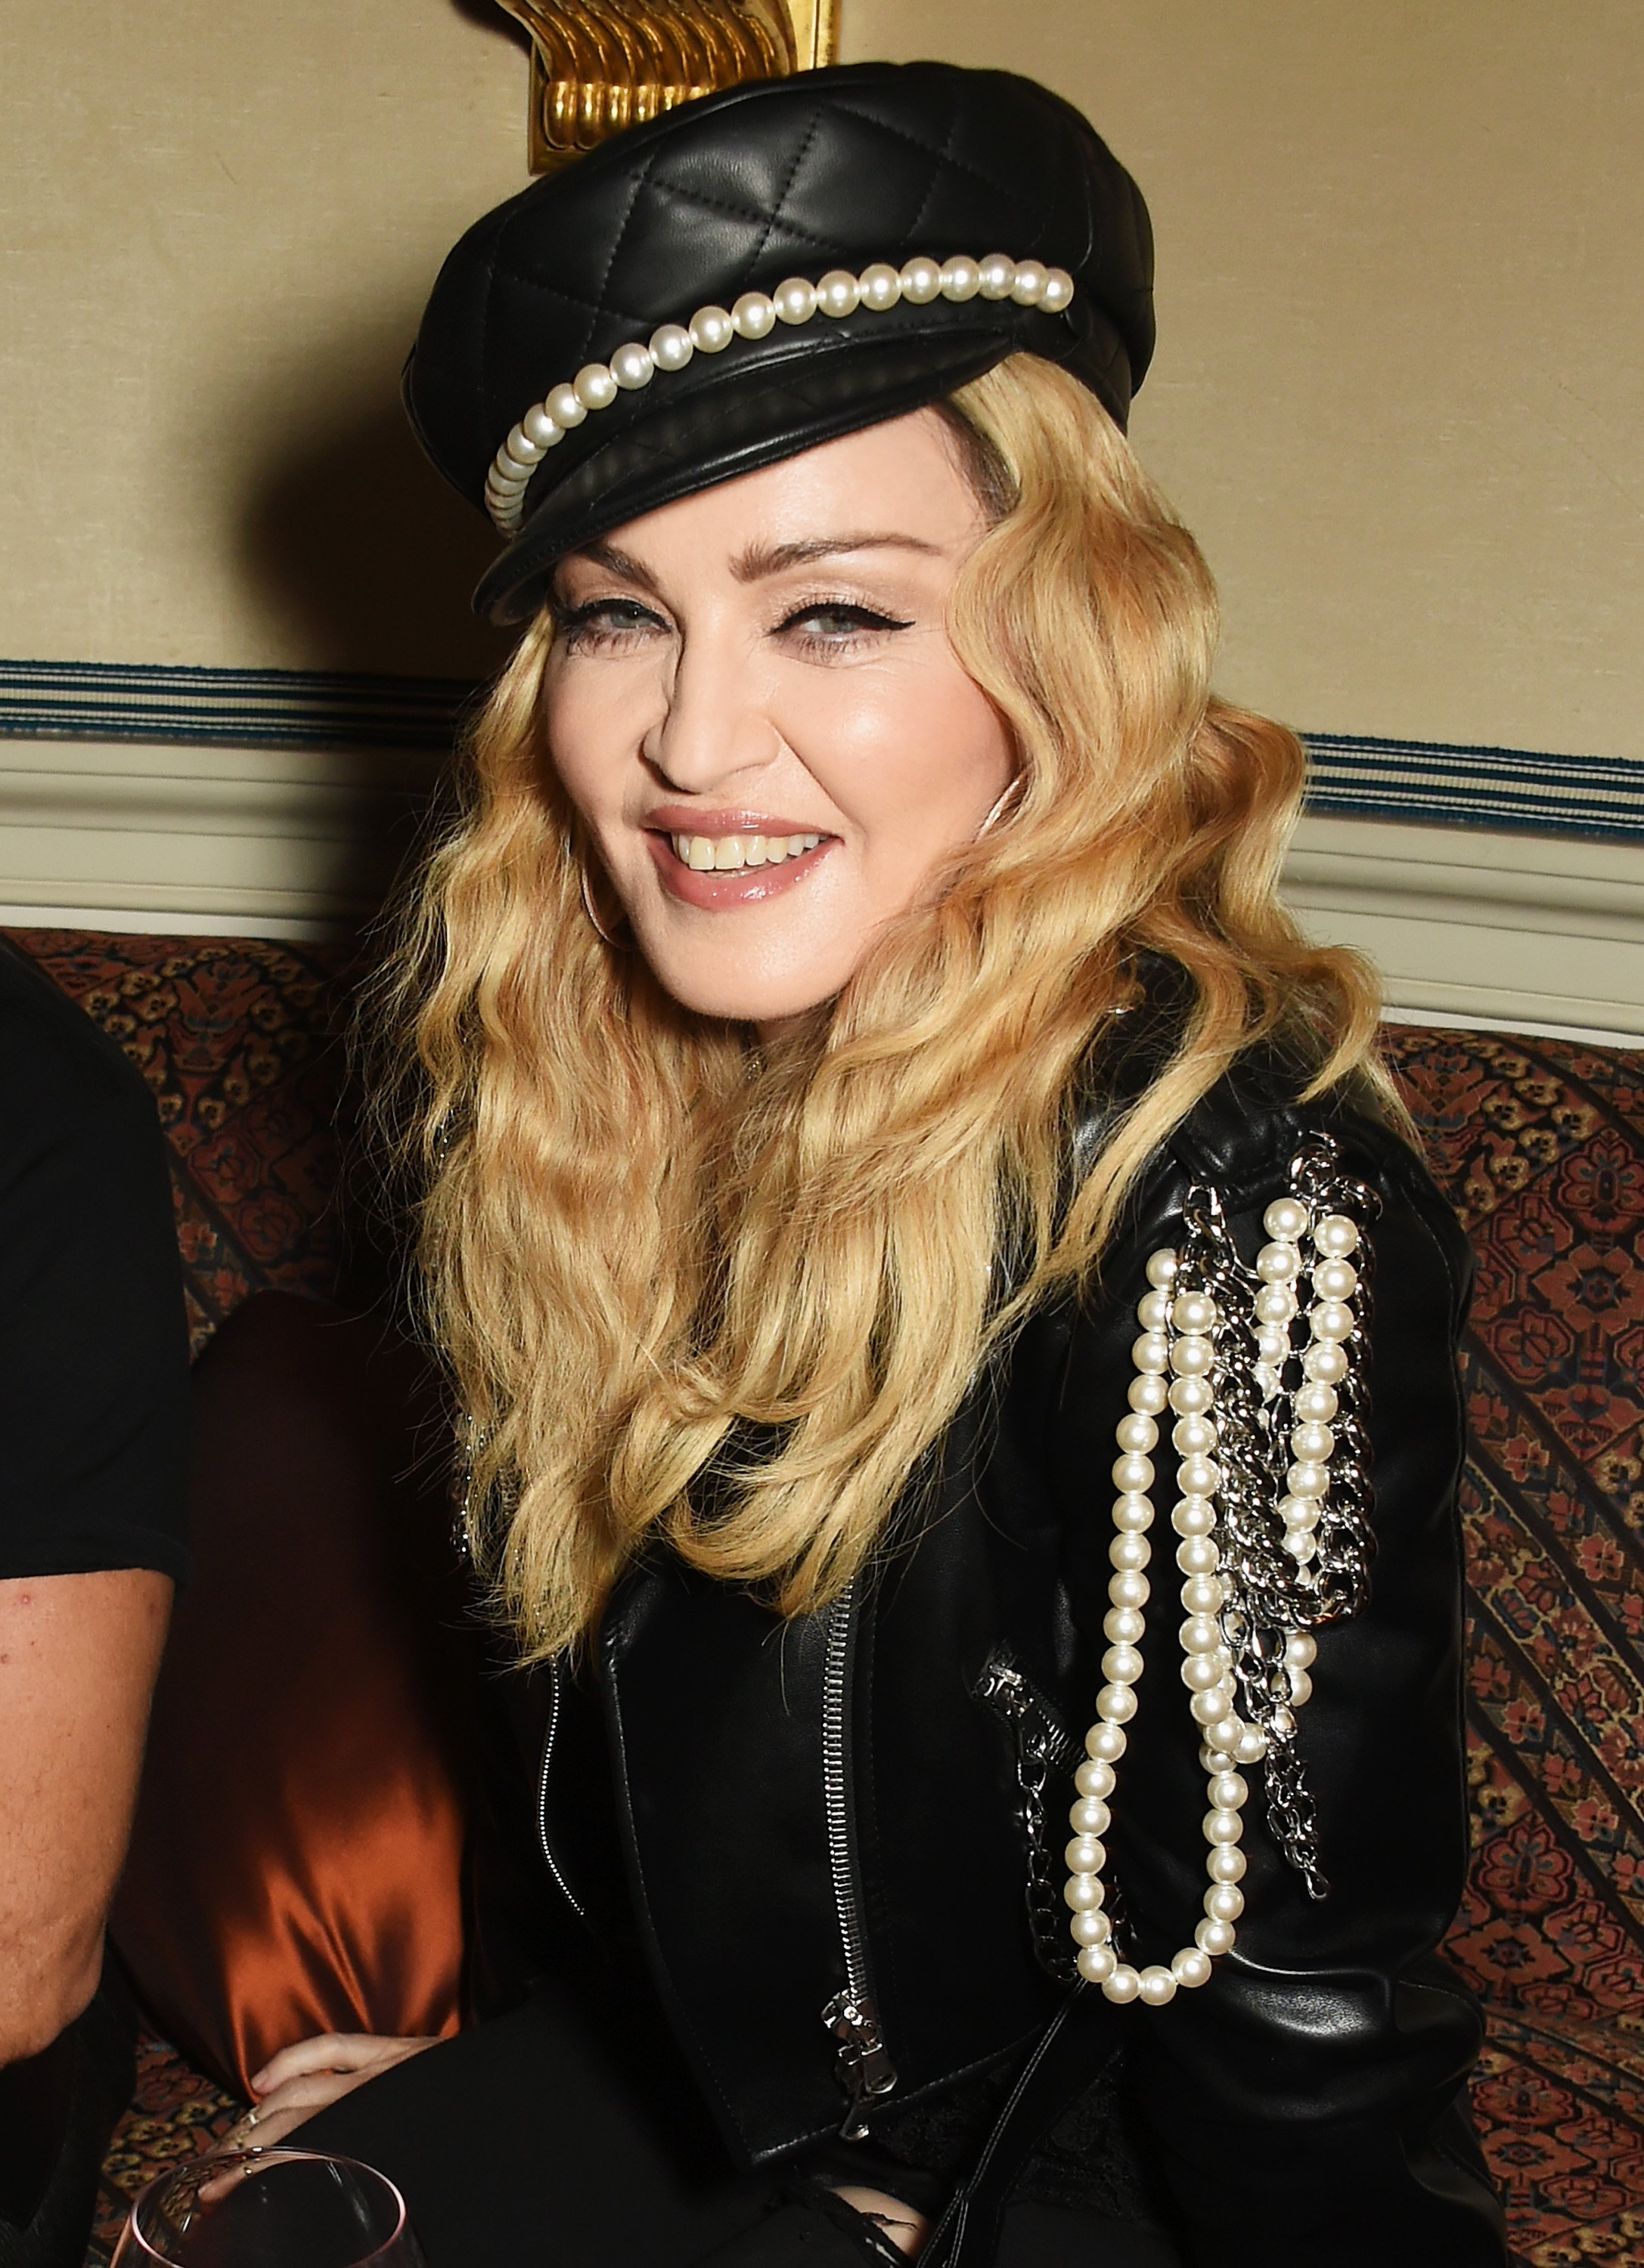 Madonna attends Edward Enninful's OBE dinner at Mark's Club on October 27, 2016. | Photo: GettyImages